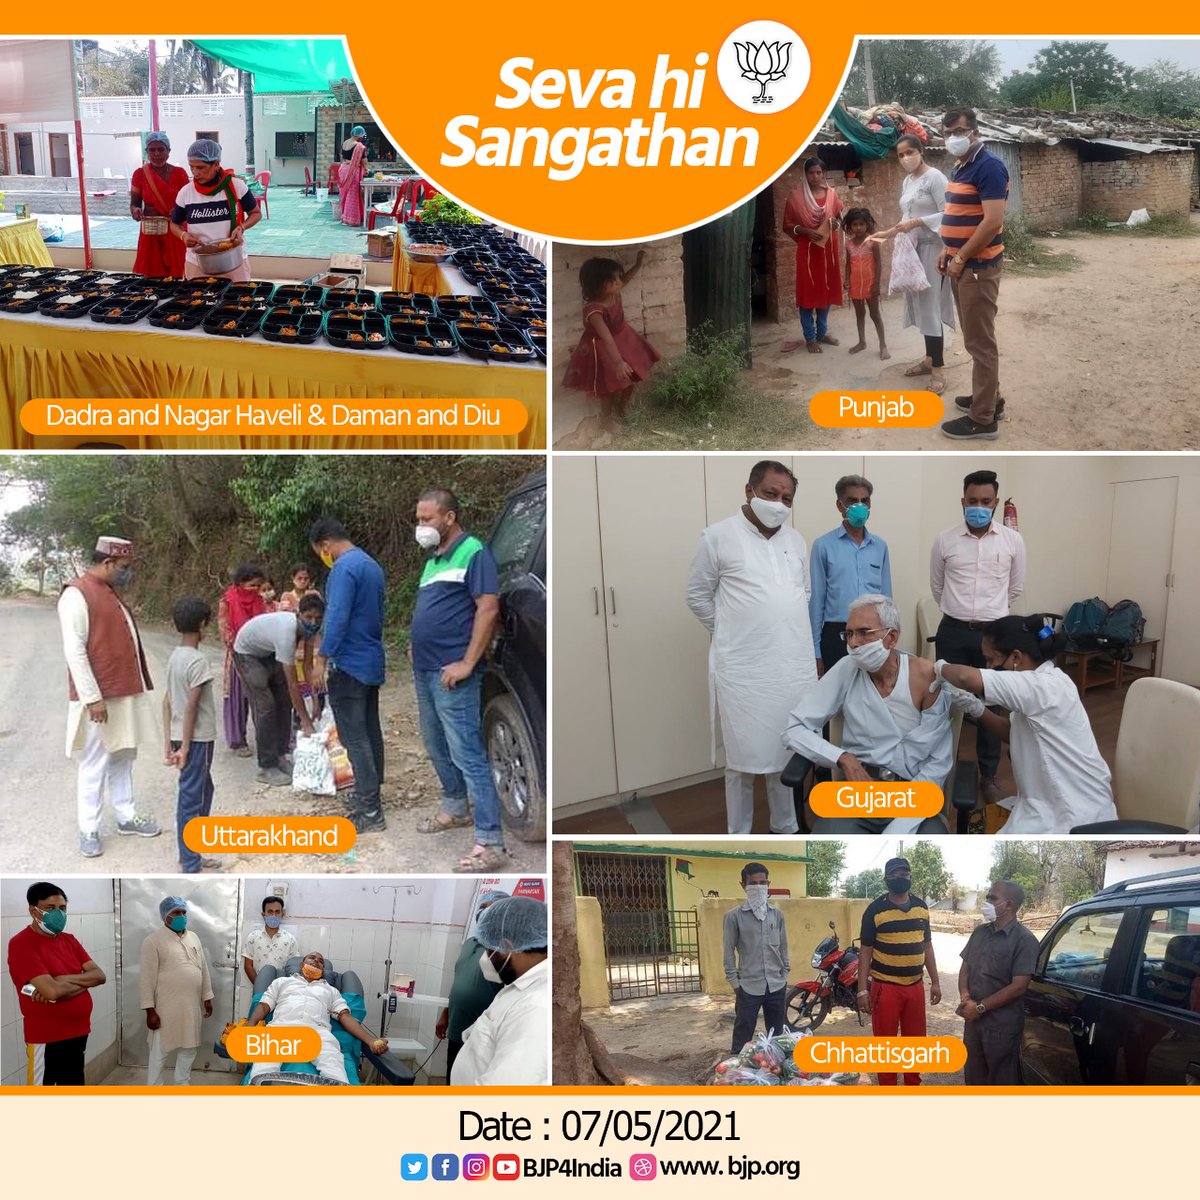 BJP Karyakartas across the country continue to serve the society and the nation during COVID-19 pandemic with food packets, plasma donations and more. #SevaHiSangathan